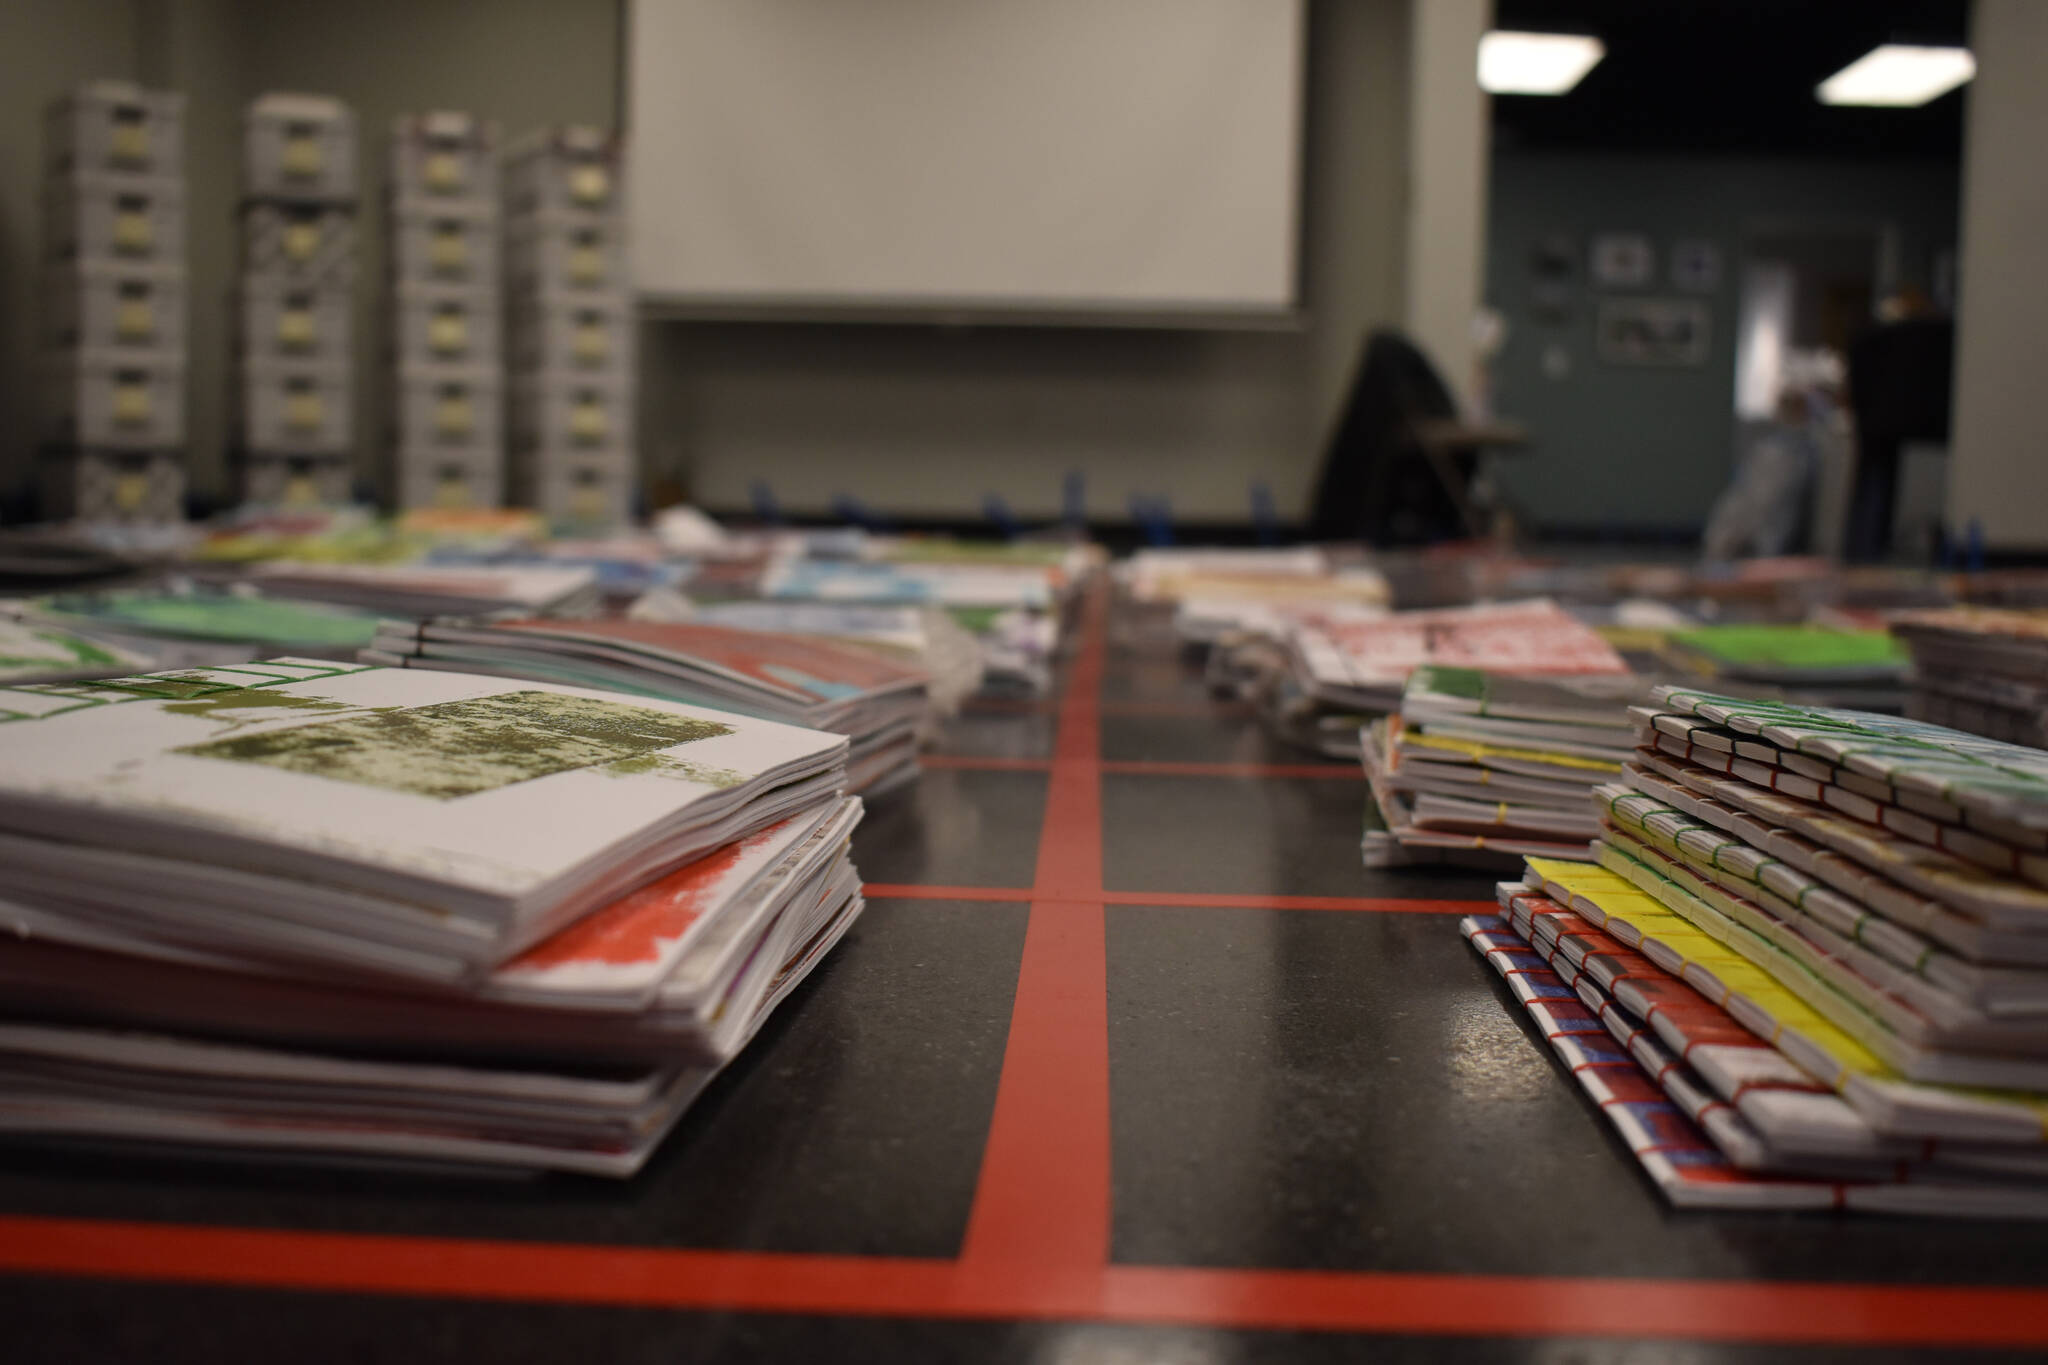 Stacks of journals cover a large space of the floor on Tuesday, Jan. 3, 2023, ahead of the opening of Diane Dunn’s “2000 Journals: Filling the Void” at the Kenai Art Center in Kenai, Alaska. (Jake Dye/Peninsula Clarion)